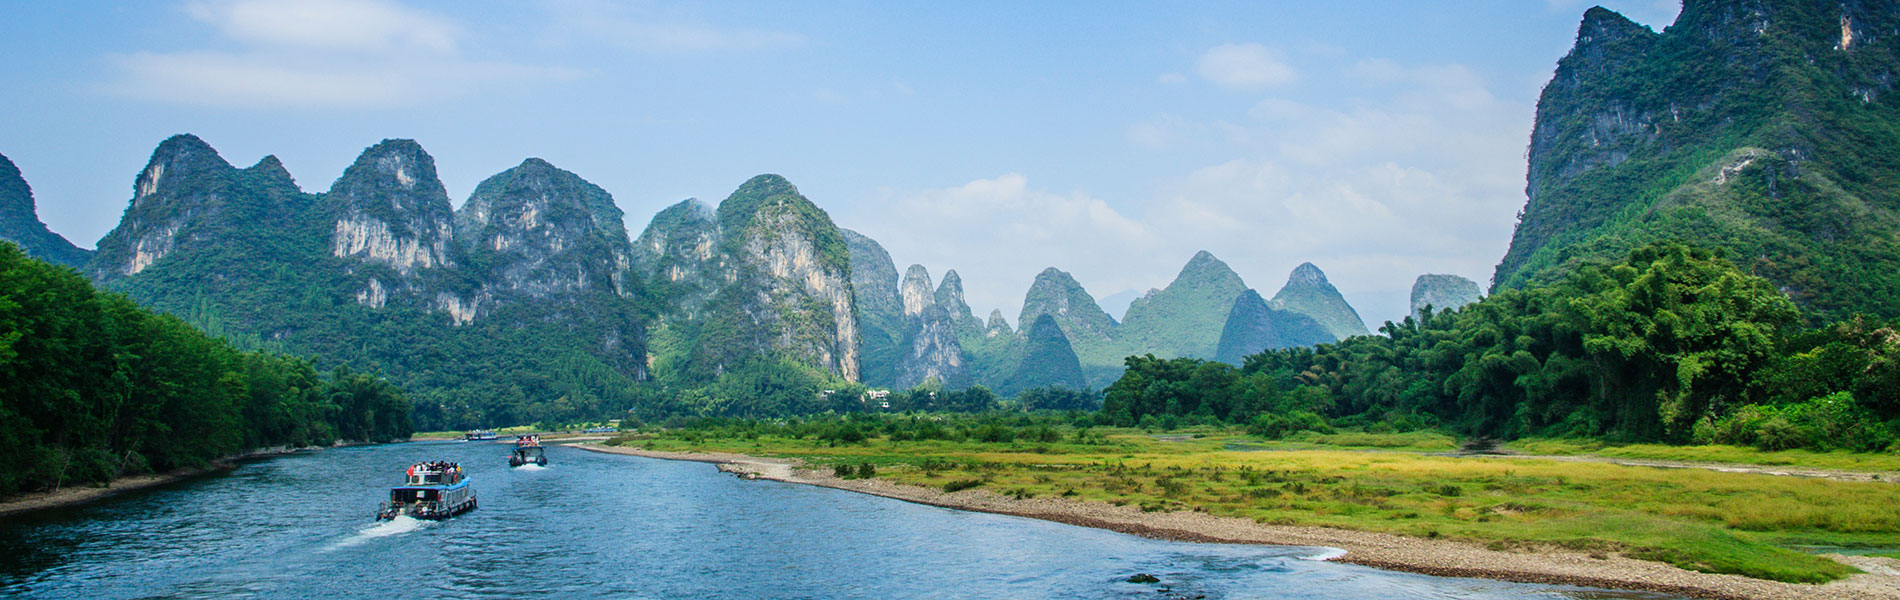 Guilin in China